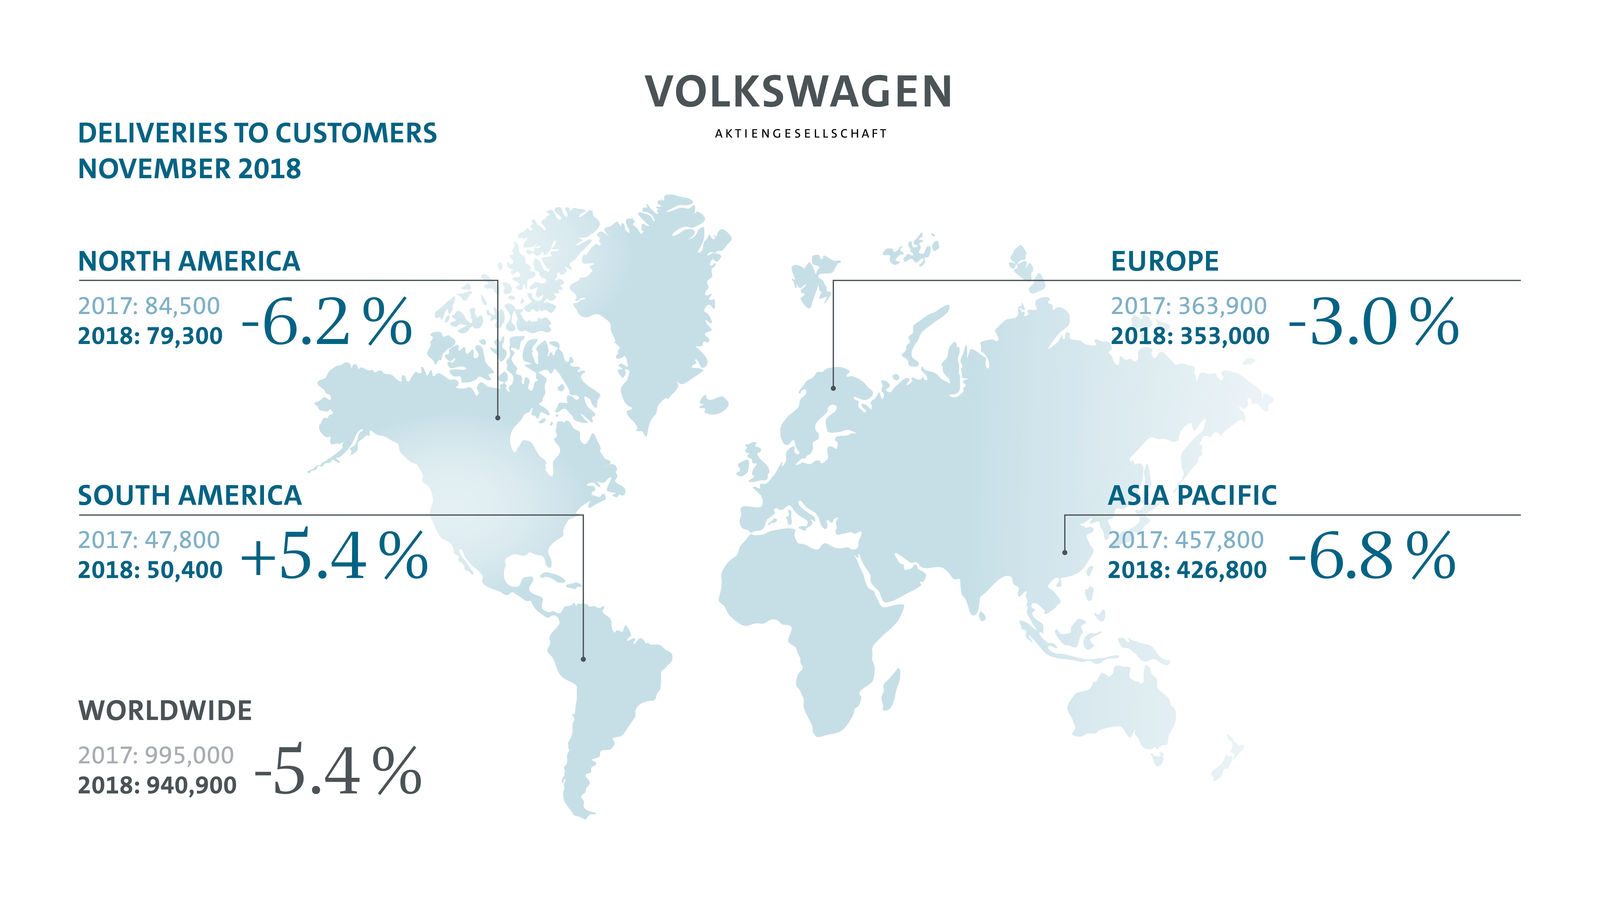 The Volkswagen Group heads for deliveries record